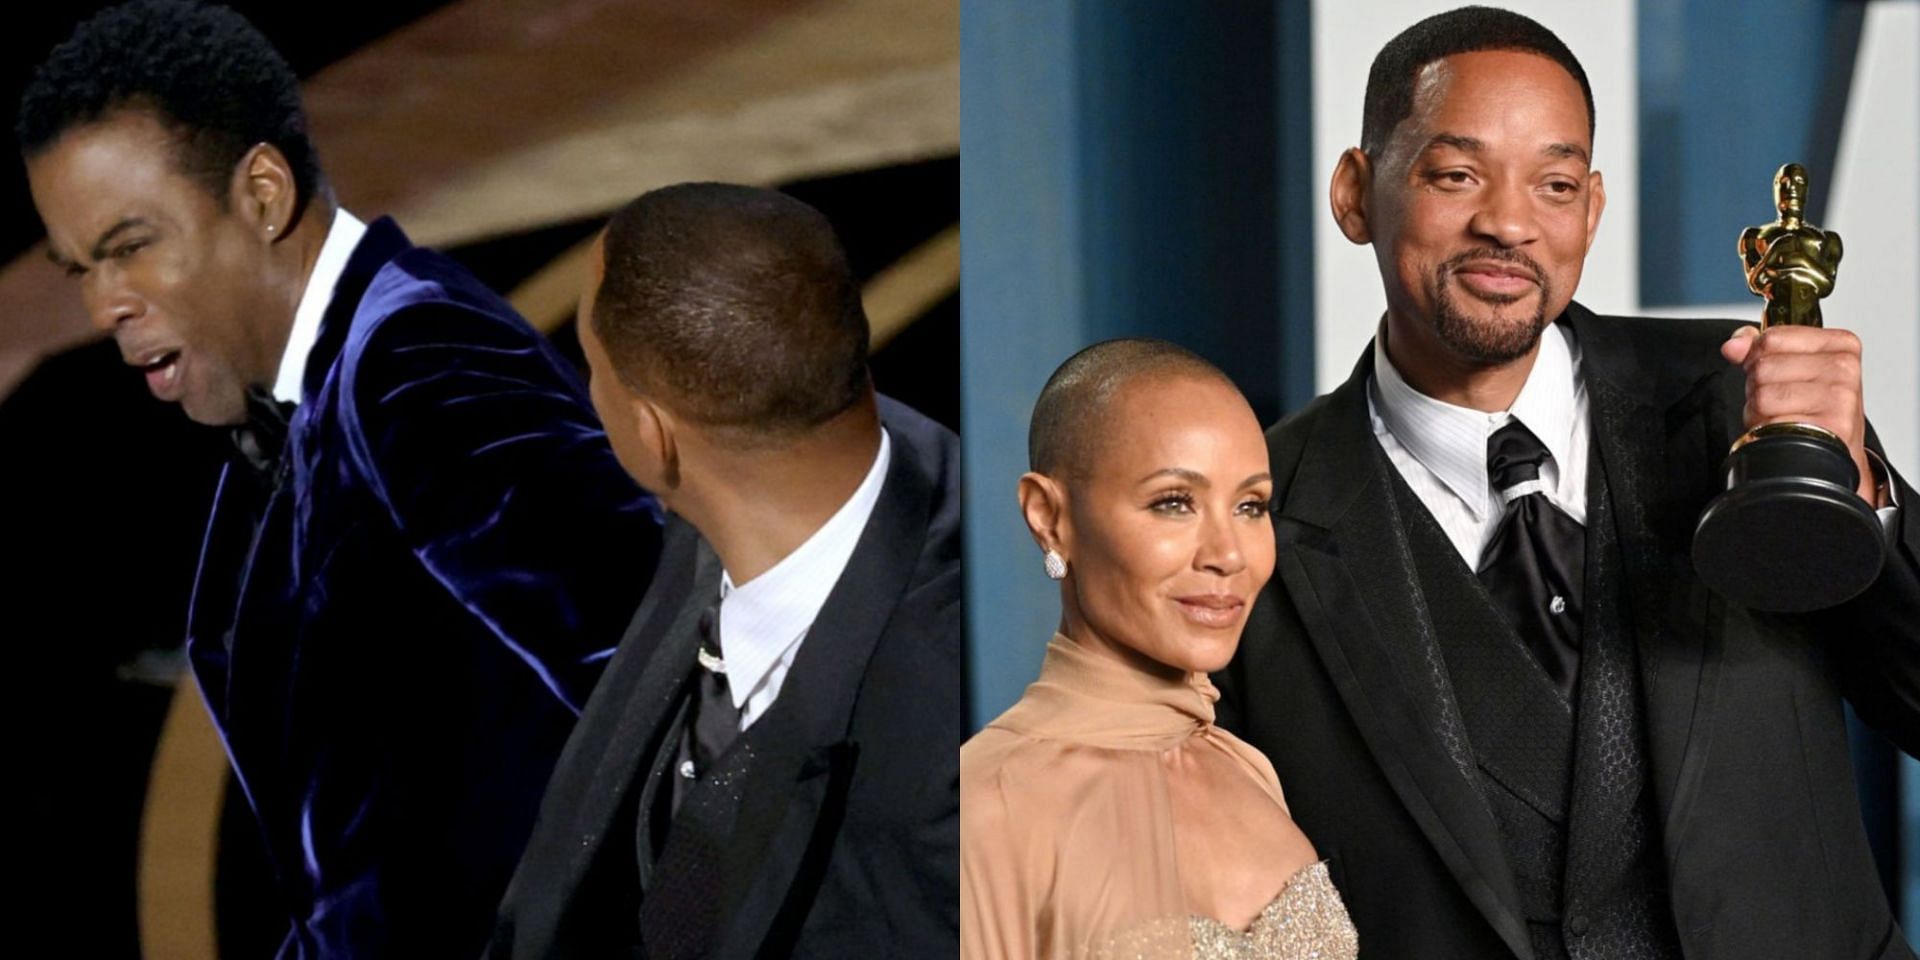 Jada Pinkett Smith said she hoped Chris Rock and Will Smith would reconcile after the Oscars slap fiasco (Image via Getty Images)